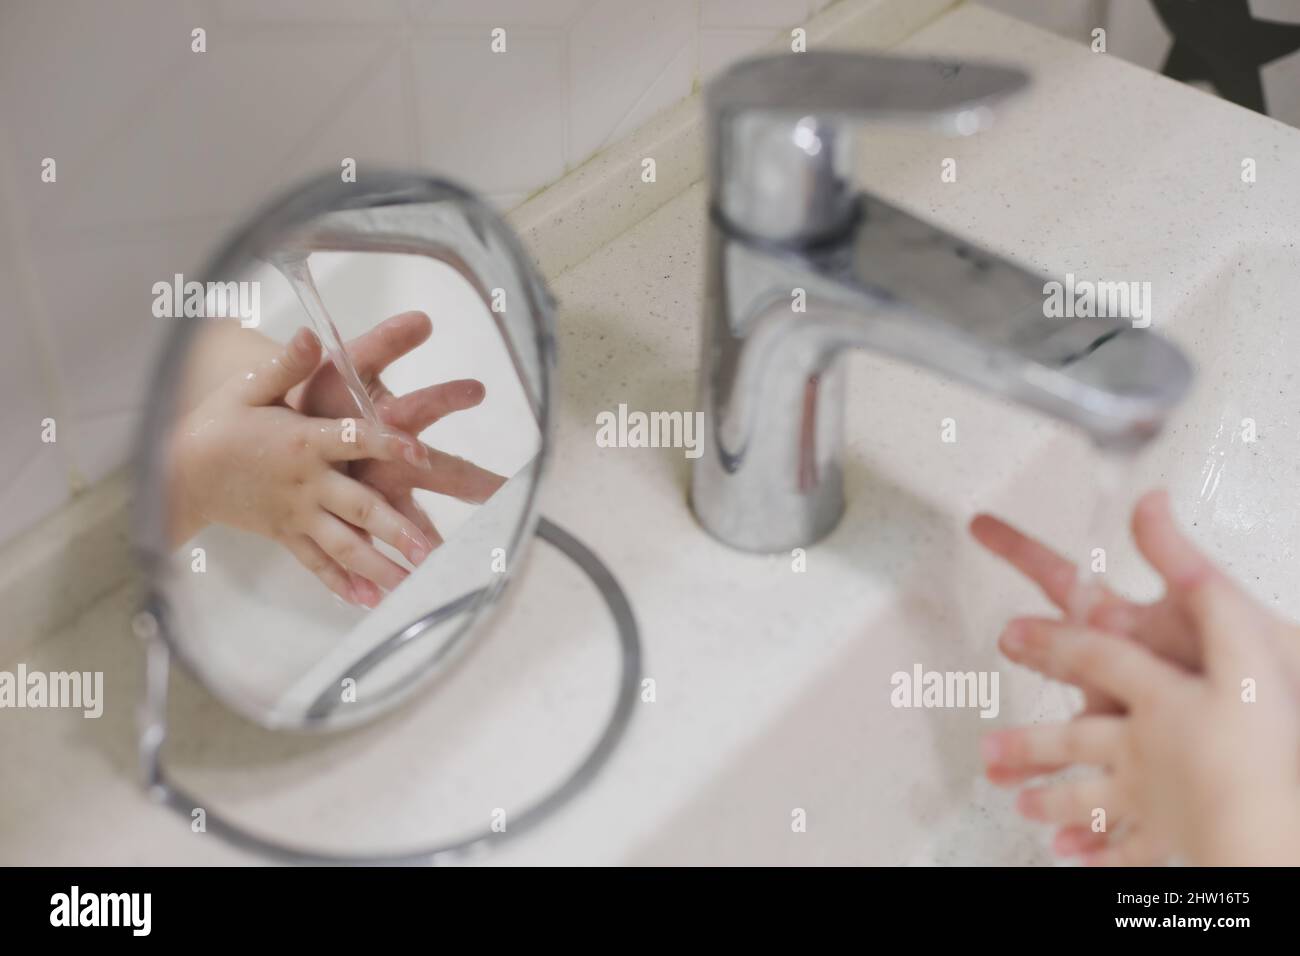 child washing hands under the tap water in the bathroom. kid's hands under stream of water. Stock Photo